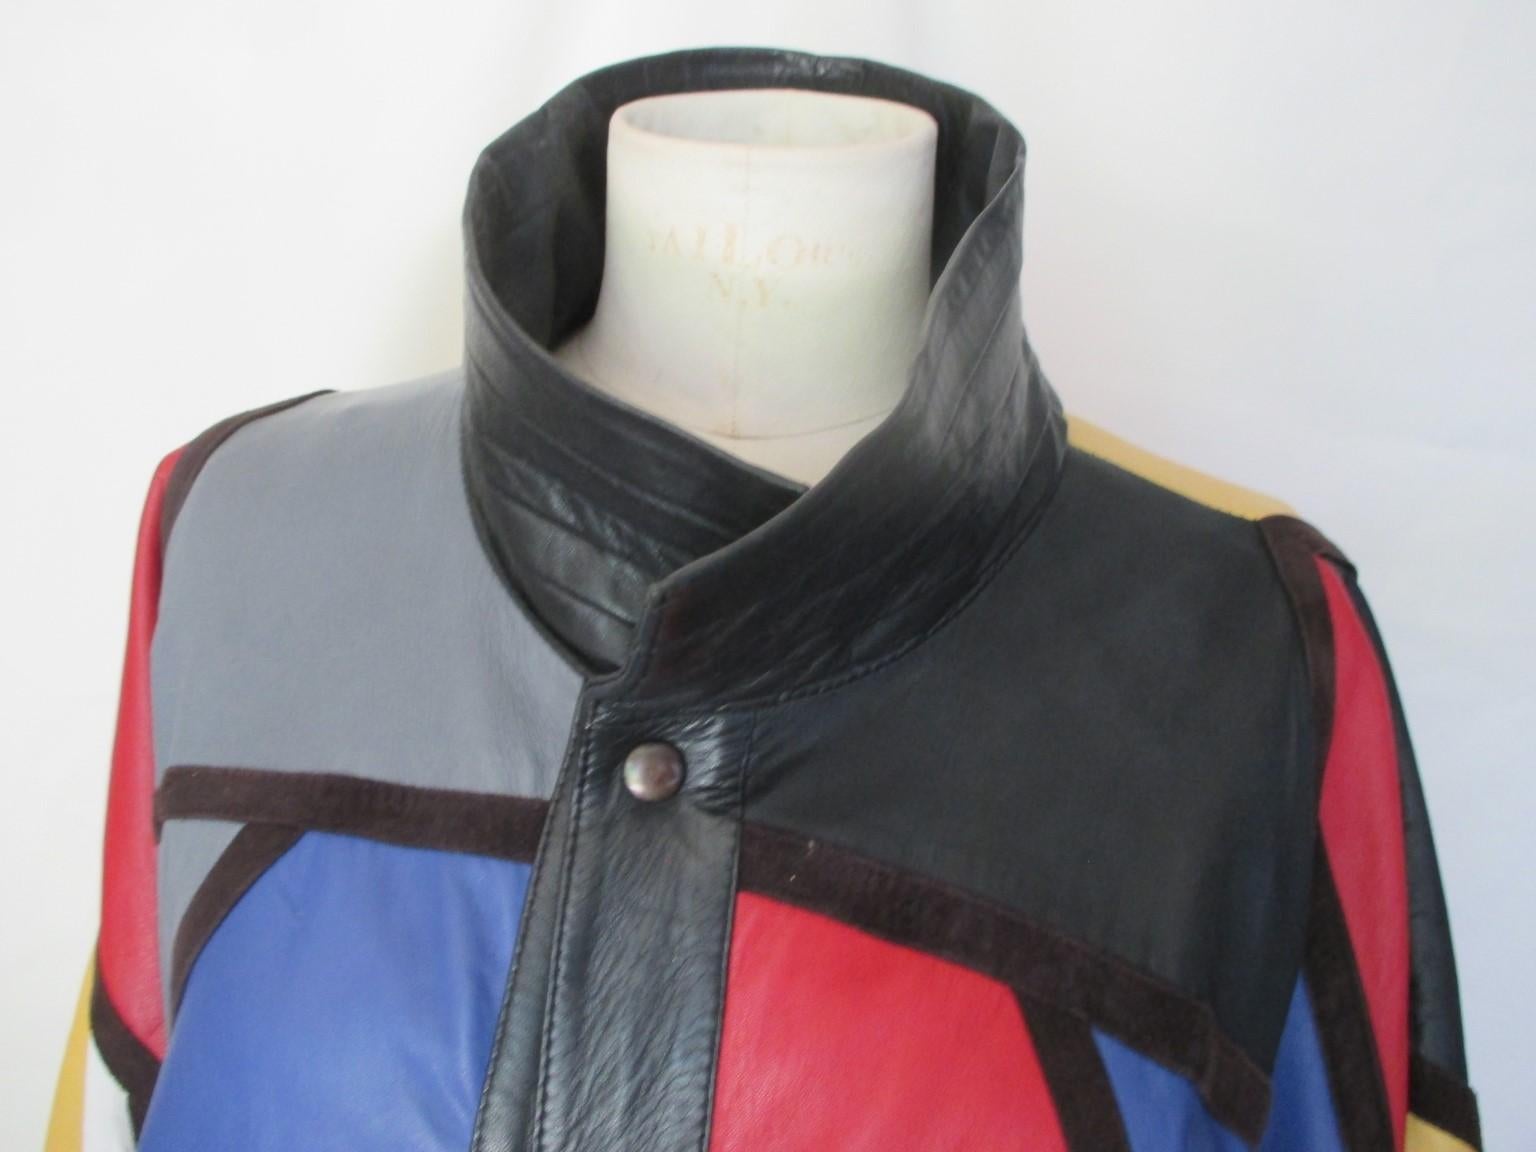 -COLLECTORS ITEM-
This rare vintage 1980's Yves saint Laurent leather coat is made in Piet Mondrian style.

We offer more exclusive vintage items, view our frontstore.

Details:
Made of soft leather in patchwork with 4 press buttons at the front and